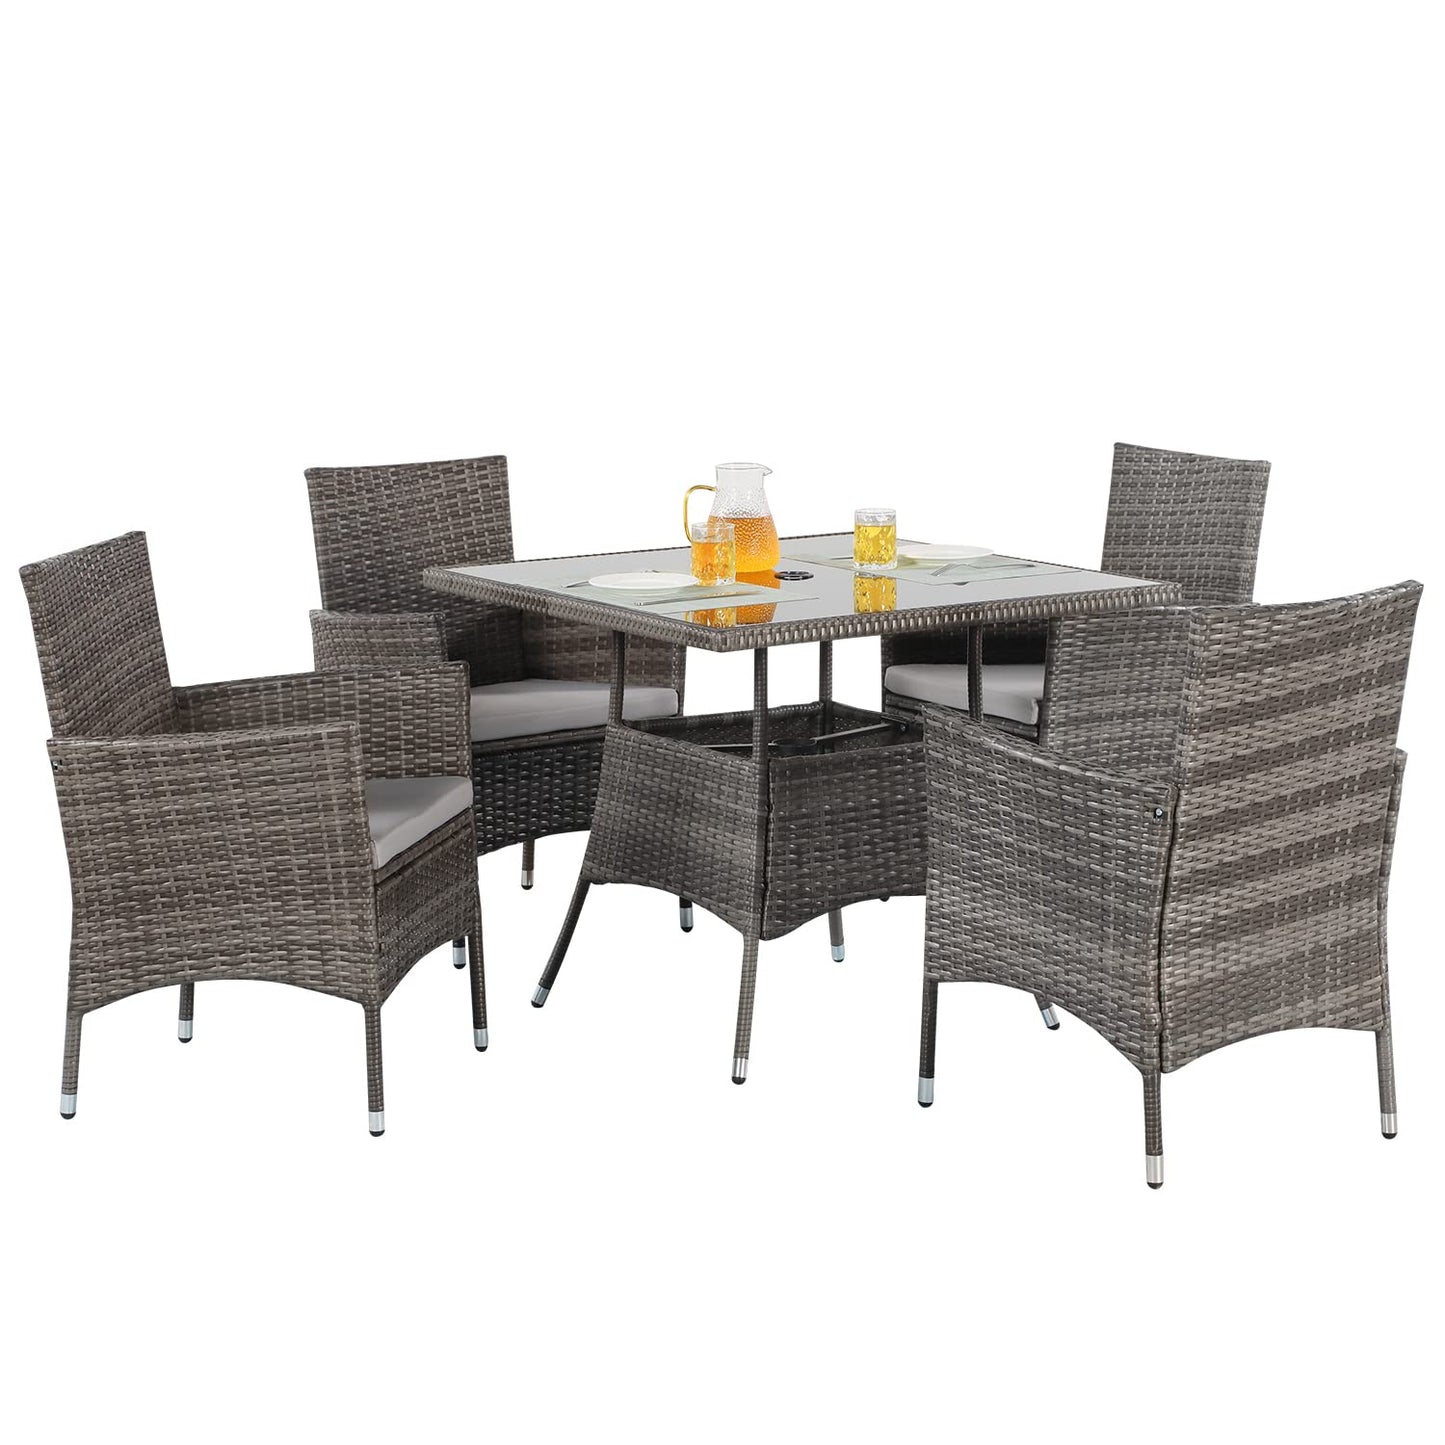 Wisteria Lane Patio Dining Set, 5-Piece Wicker Outdoor Table and Chairs Set for 4, Square Tempered Glass Table Top with Umbrella Hole, Rattan Outdoor Furniture Set for Backyard Deck, Grey